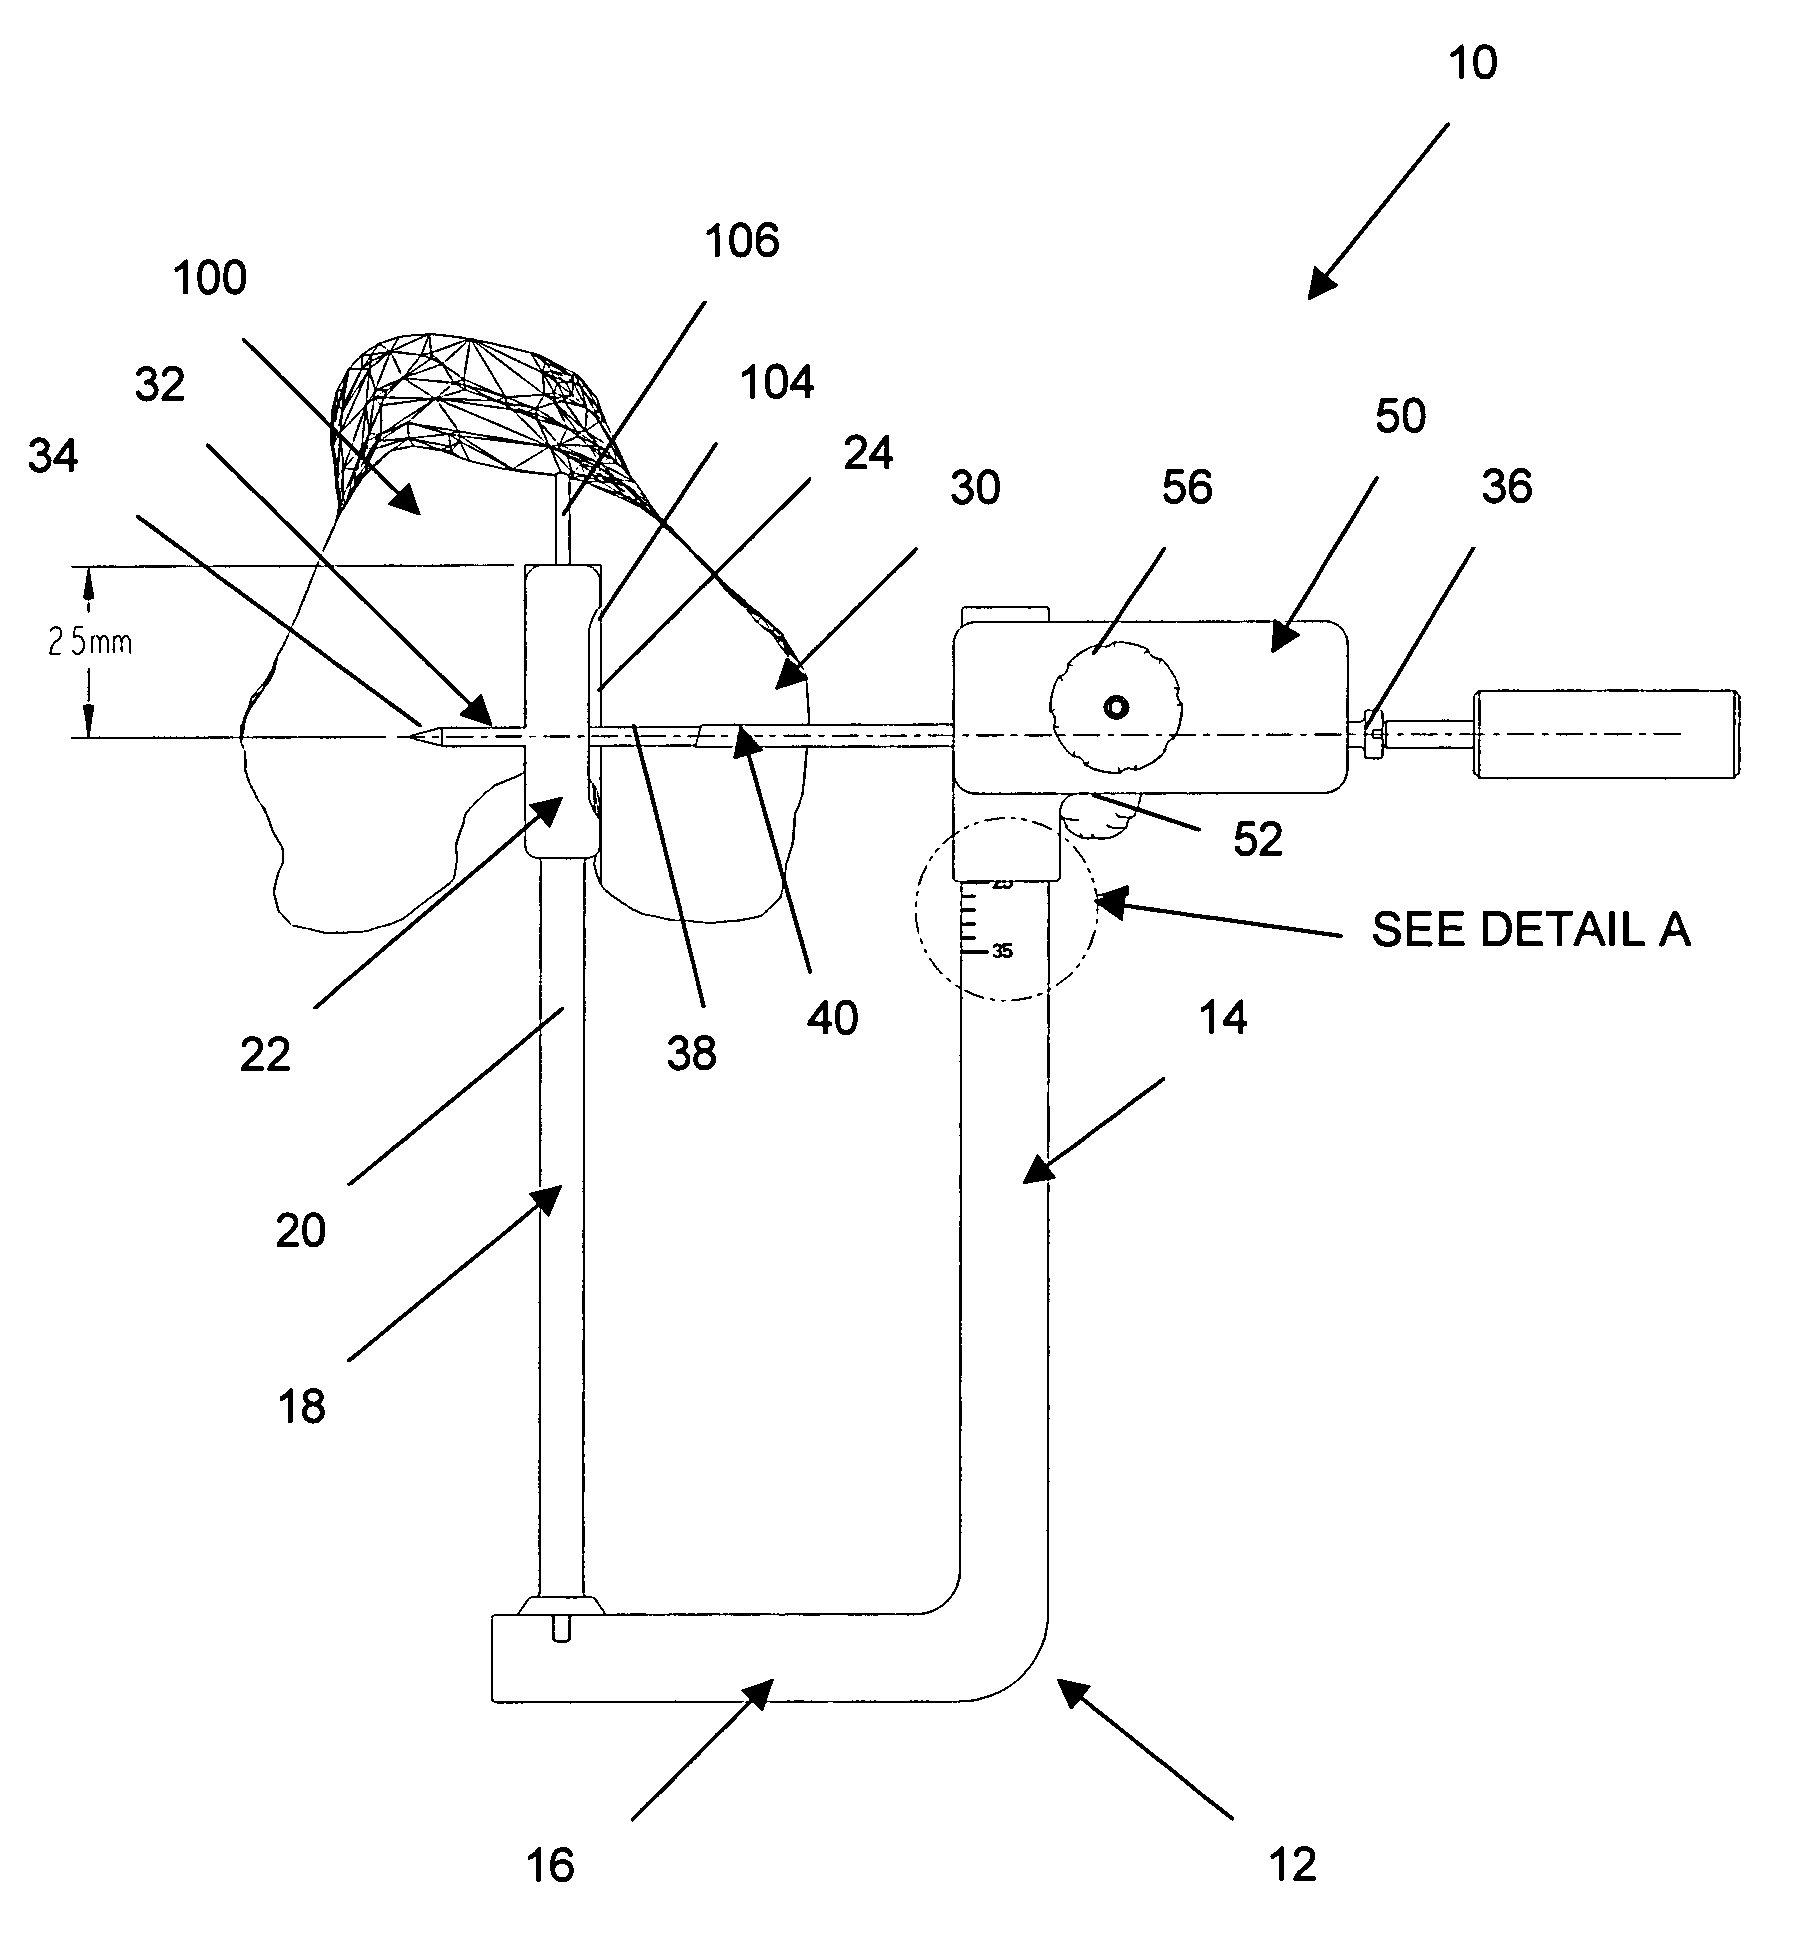 Adjustable drill guide assembly and method of use